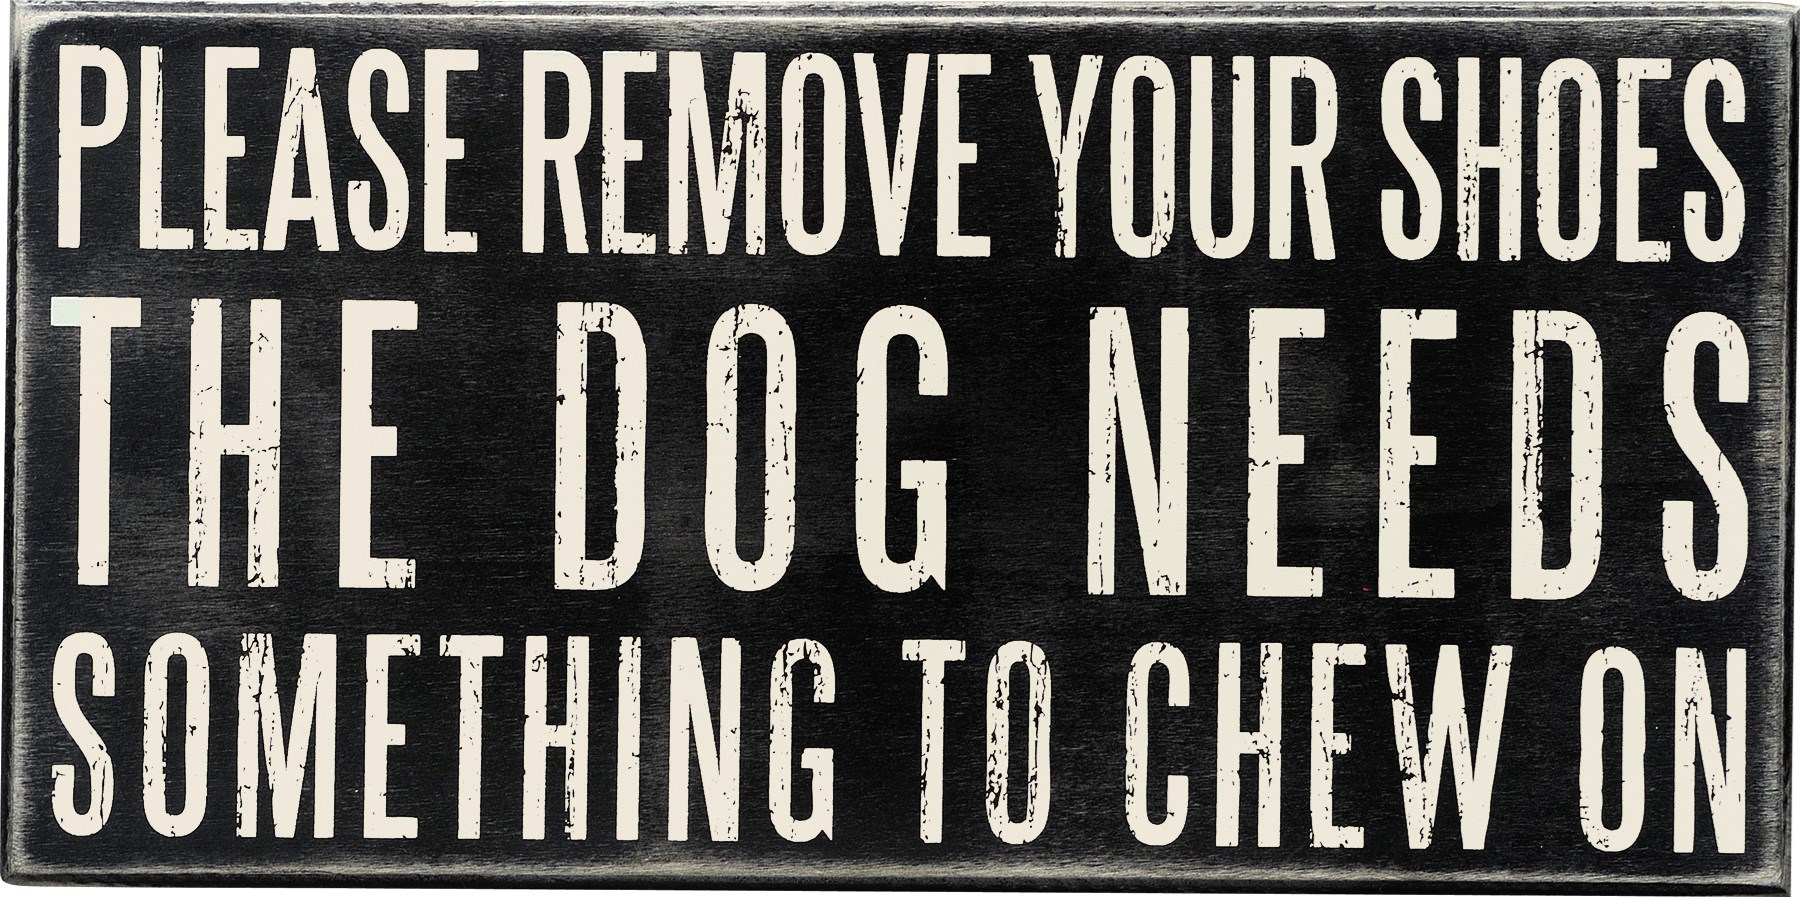 Dog Needs Something to Chew On 12 x 6 Primitives by Kathy 21488 Classic Box Sign 